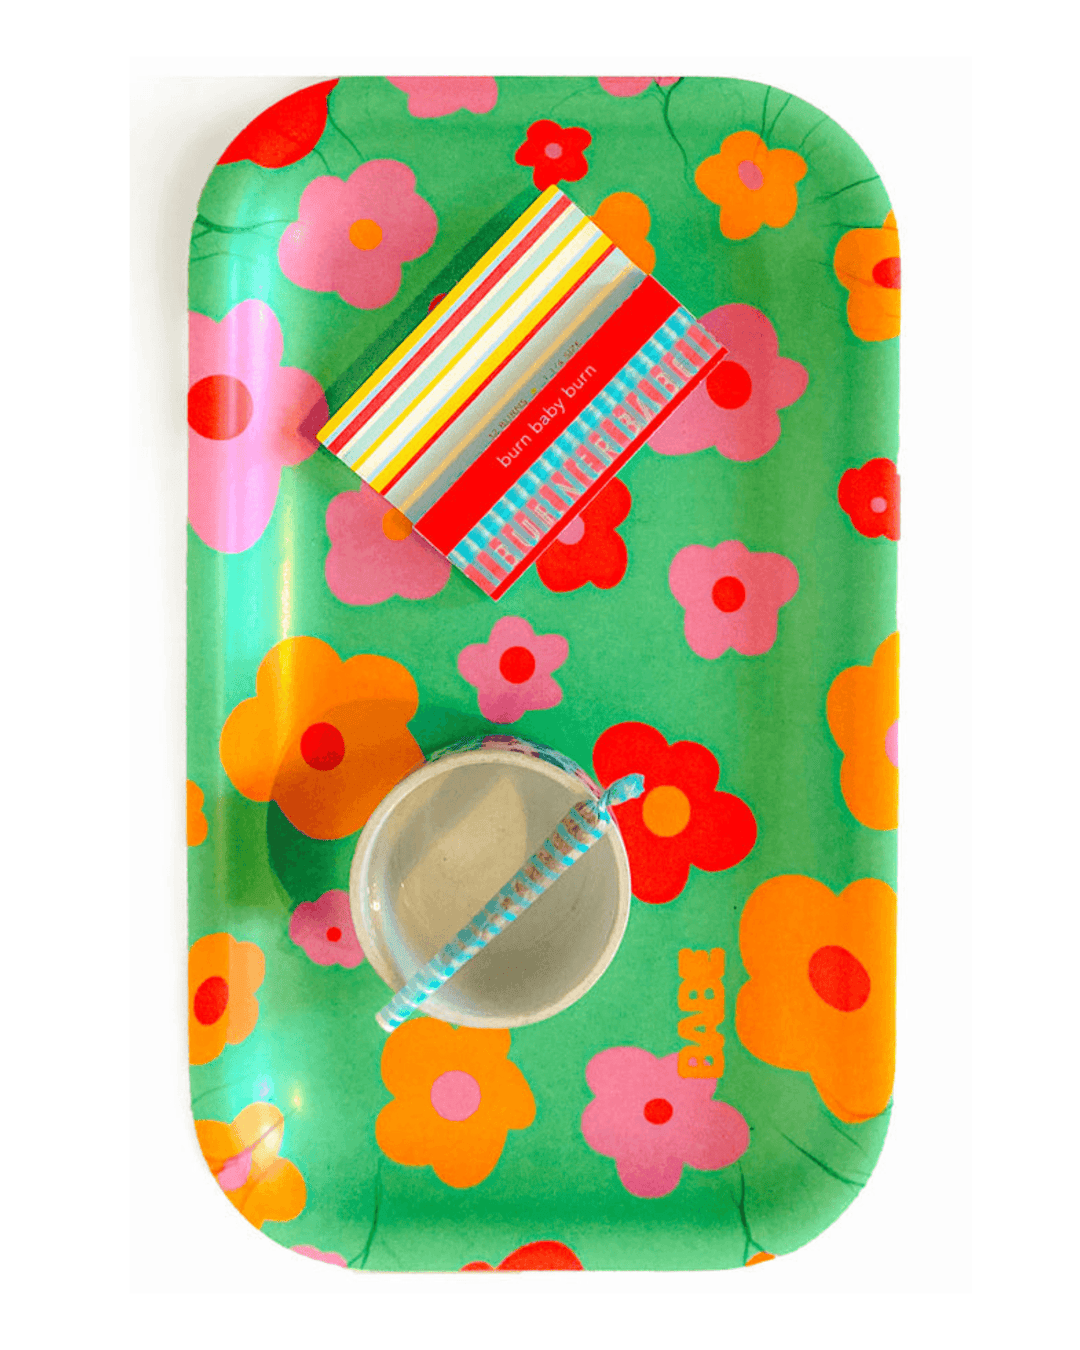 cute vintage inspired feminine joint rolling tray